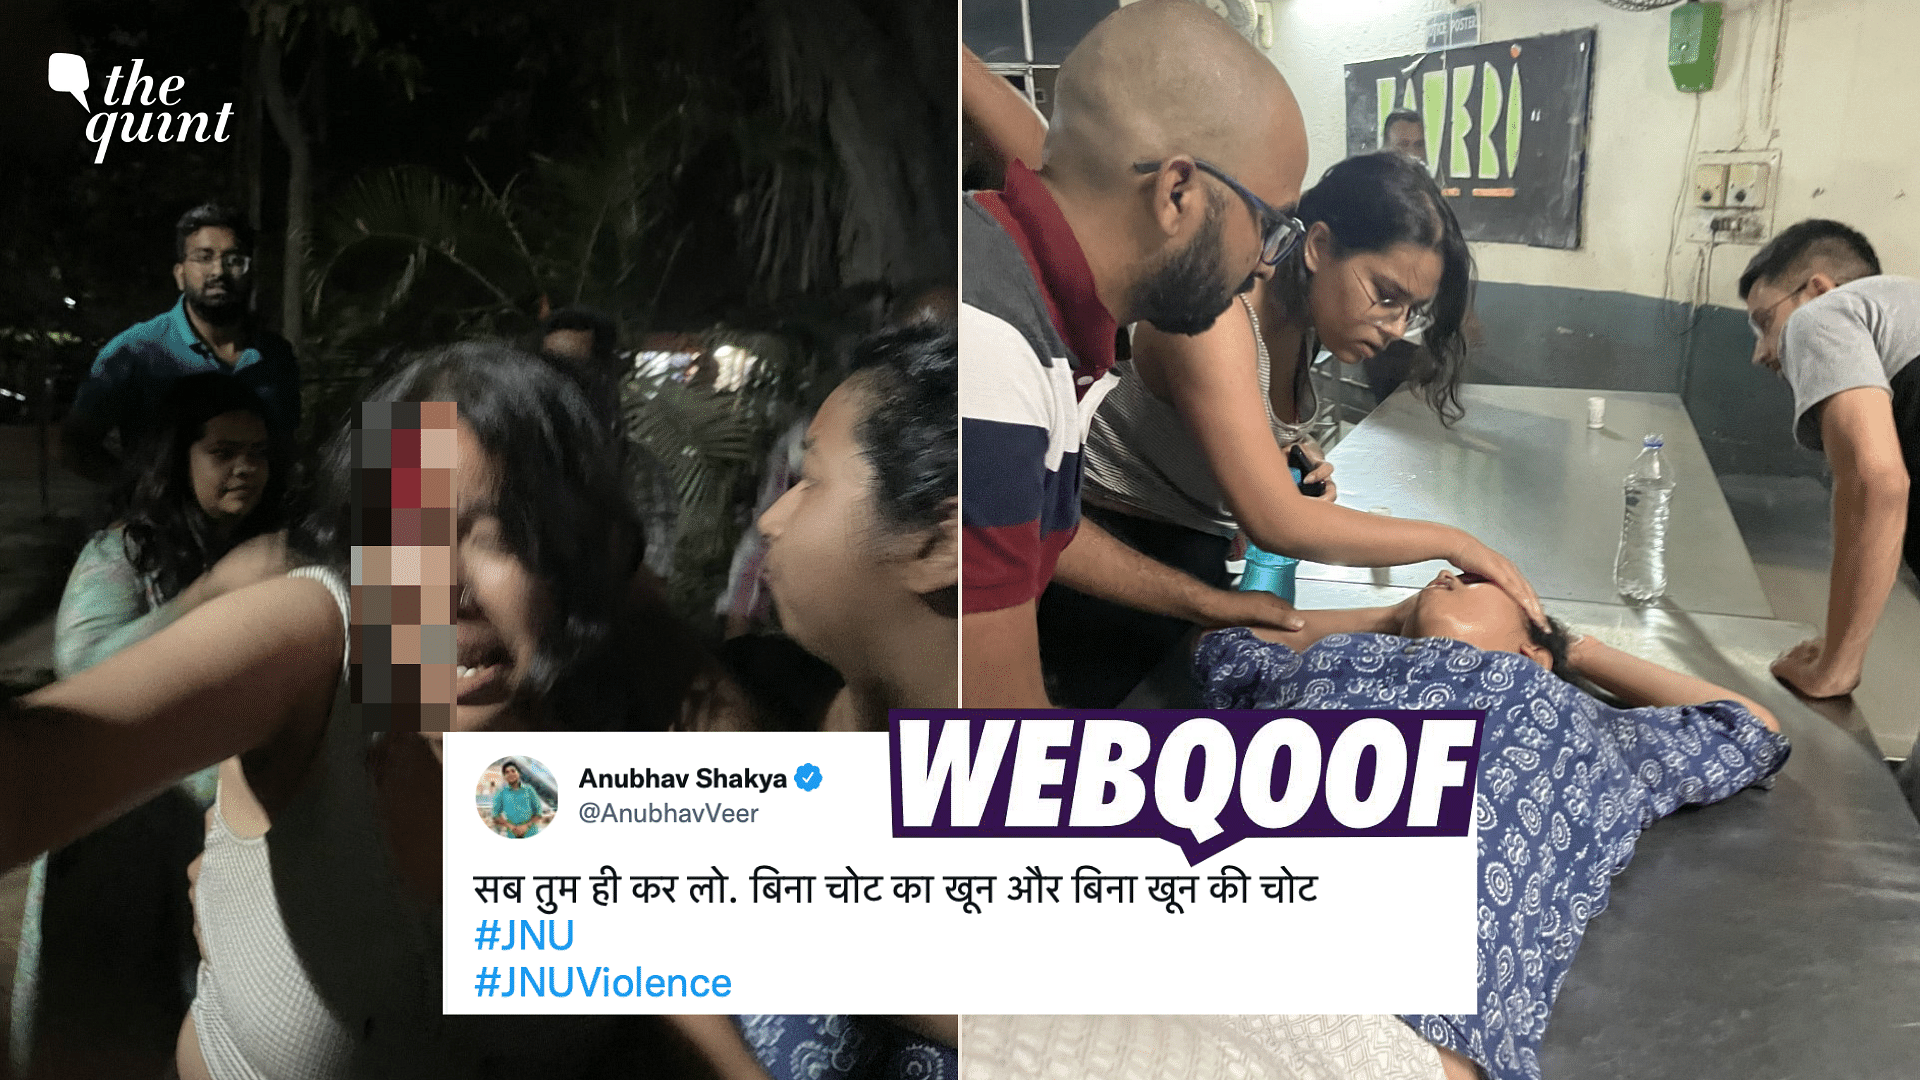 <div class="paragraphs"><p>The Quint spoke to one of the people in the photos, who clarified that she fell unconscious while her friend was hurt in the head.</p></div>